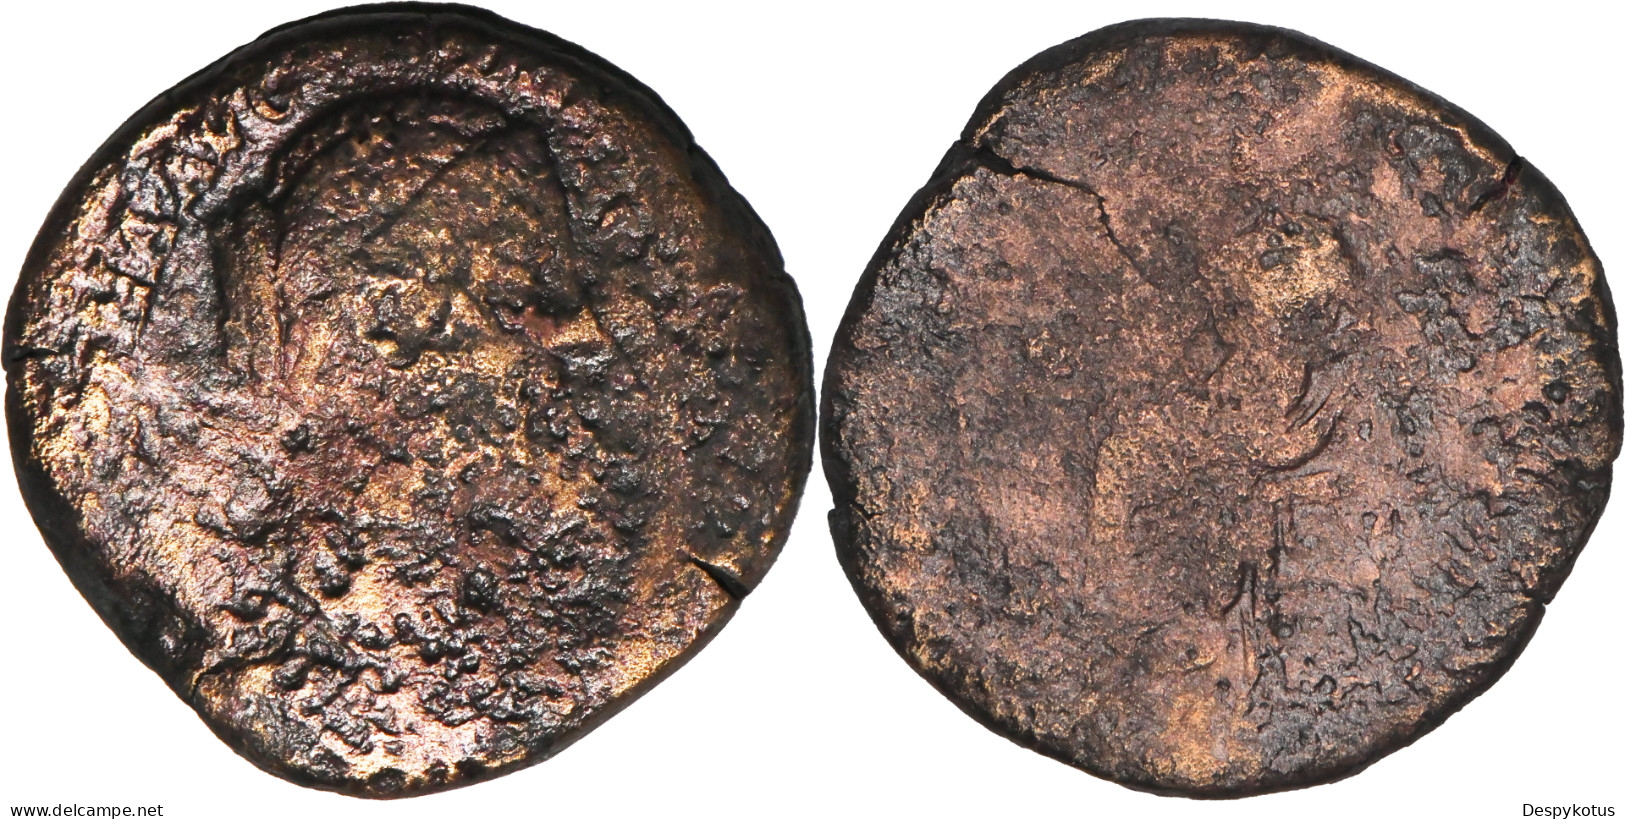 ROME - Sesterce - CRISPINE - 181 AD - 19-150 - The Anthonines (96 AD To 192 AD)